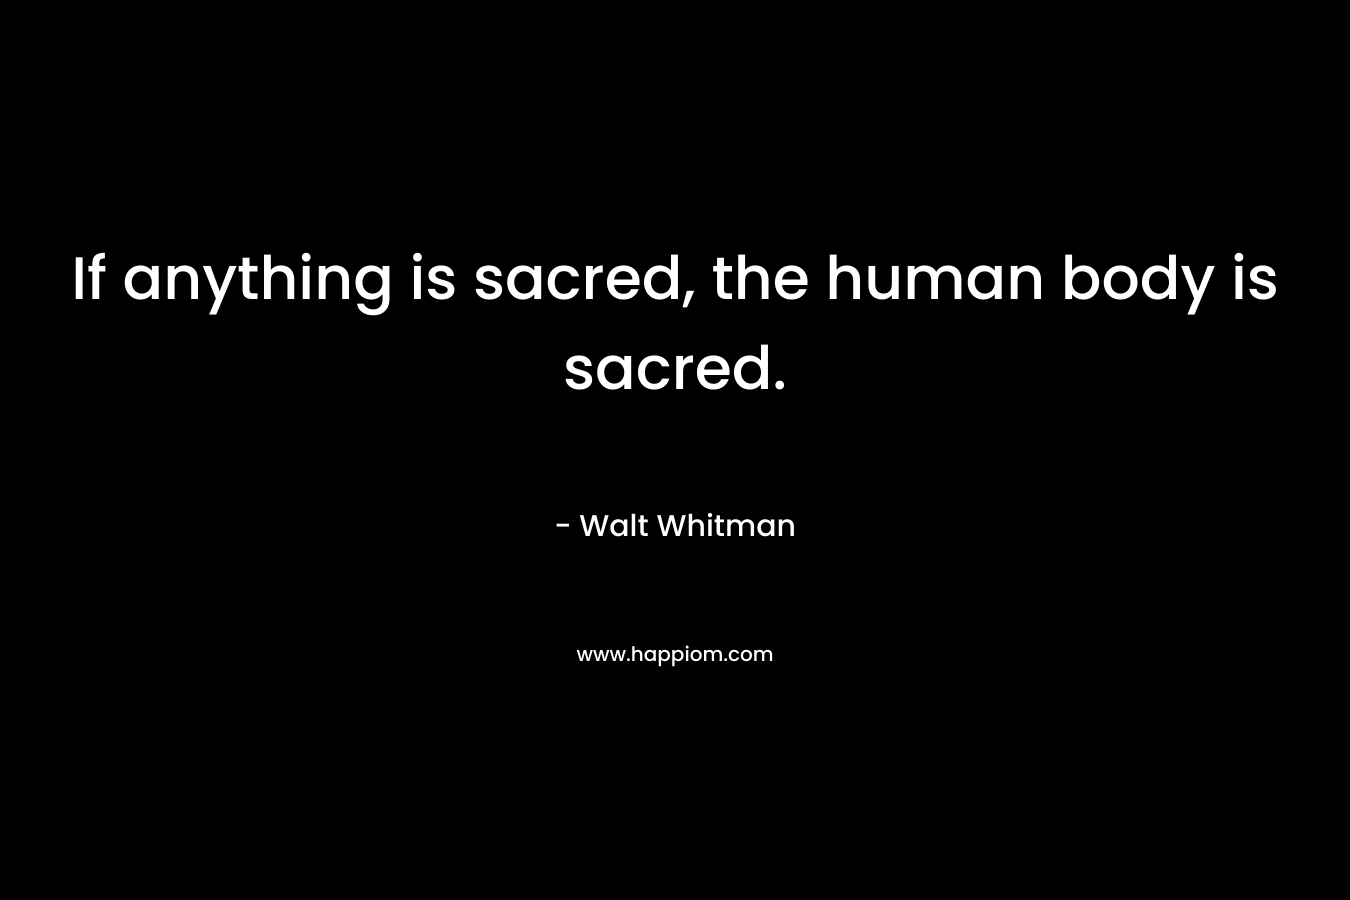 If anything is sacred, the human body is sacred.